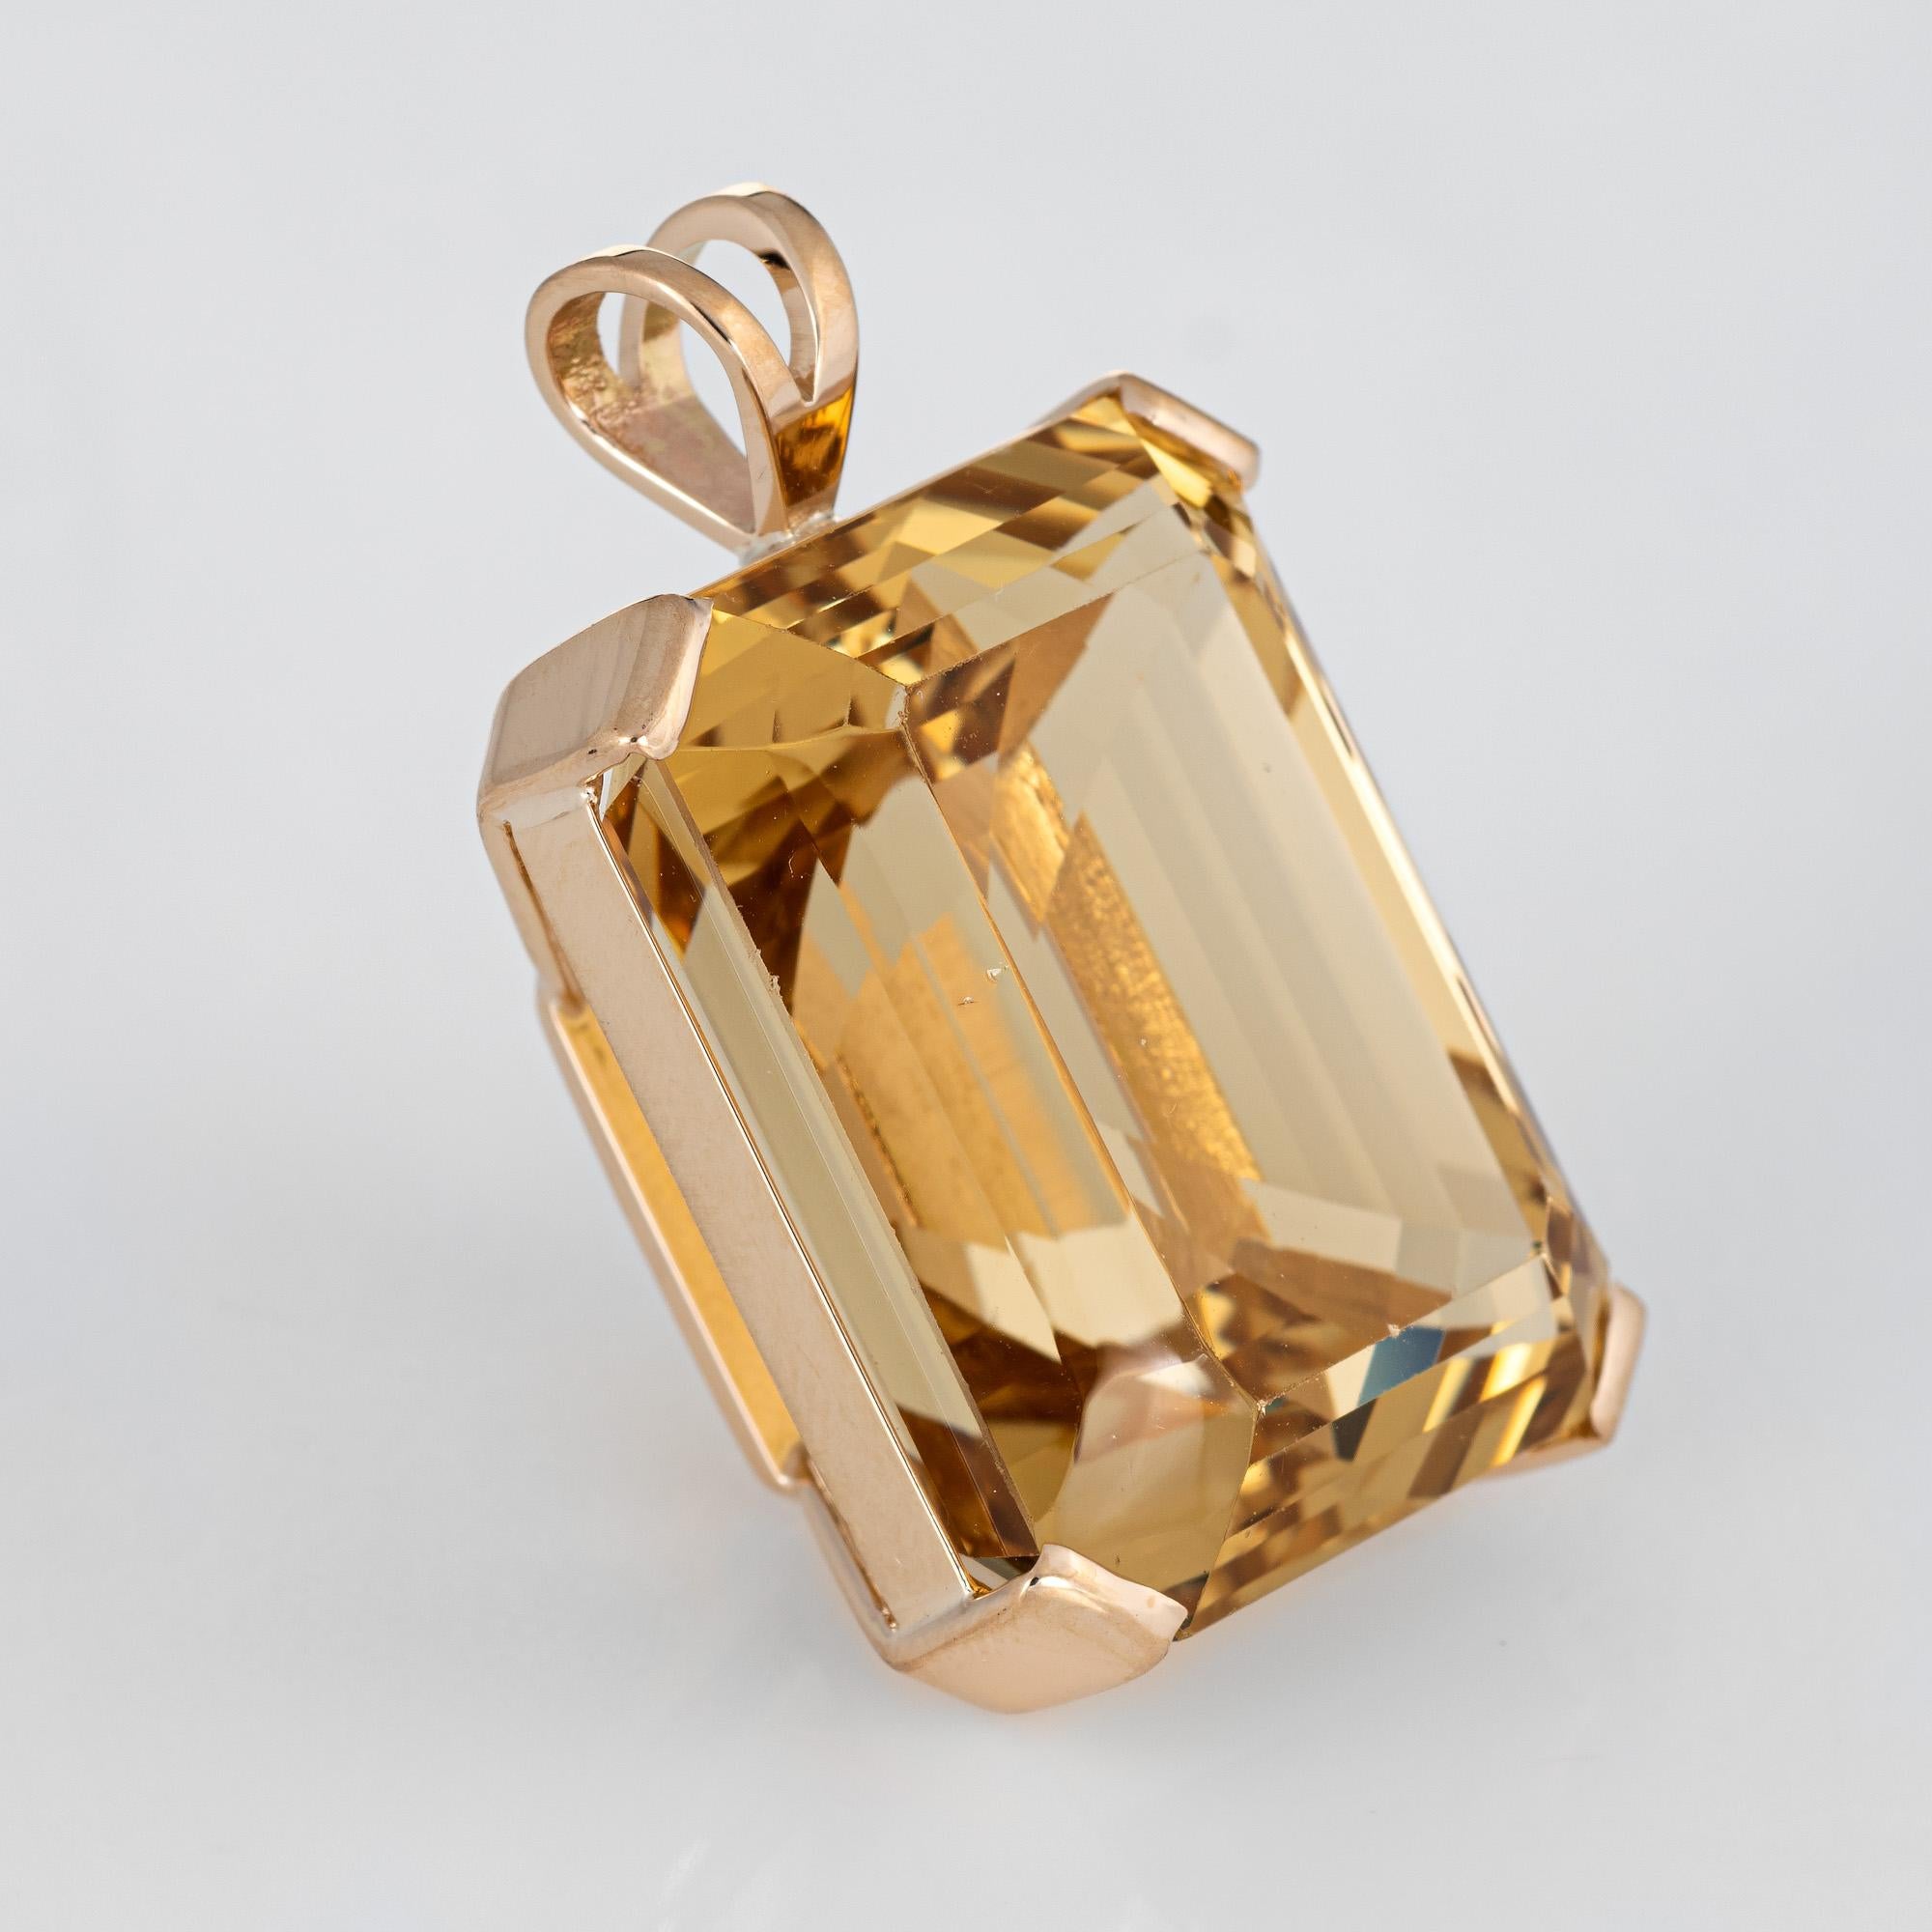 Finely detailed large vintage citrine pendant (circa 1960s to 1970s) crafted in 14k yellow gold.   

The citrine measures 23mm x 18mm (estimated at 43 carats). The citrine is in very good condition (few small chips visible under a 10x loupe).

The